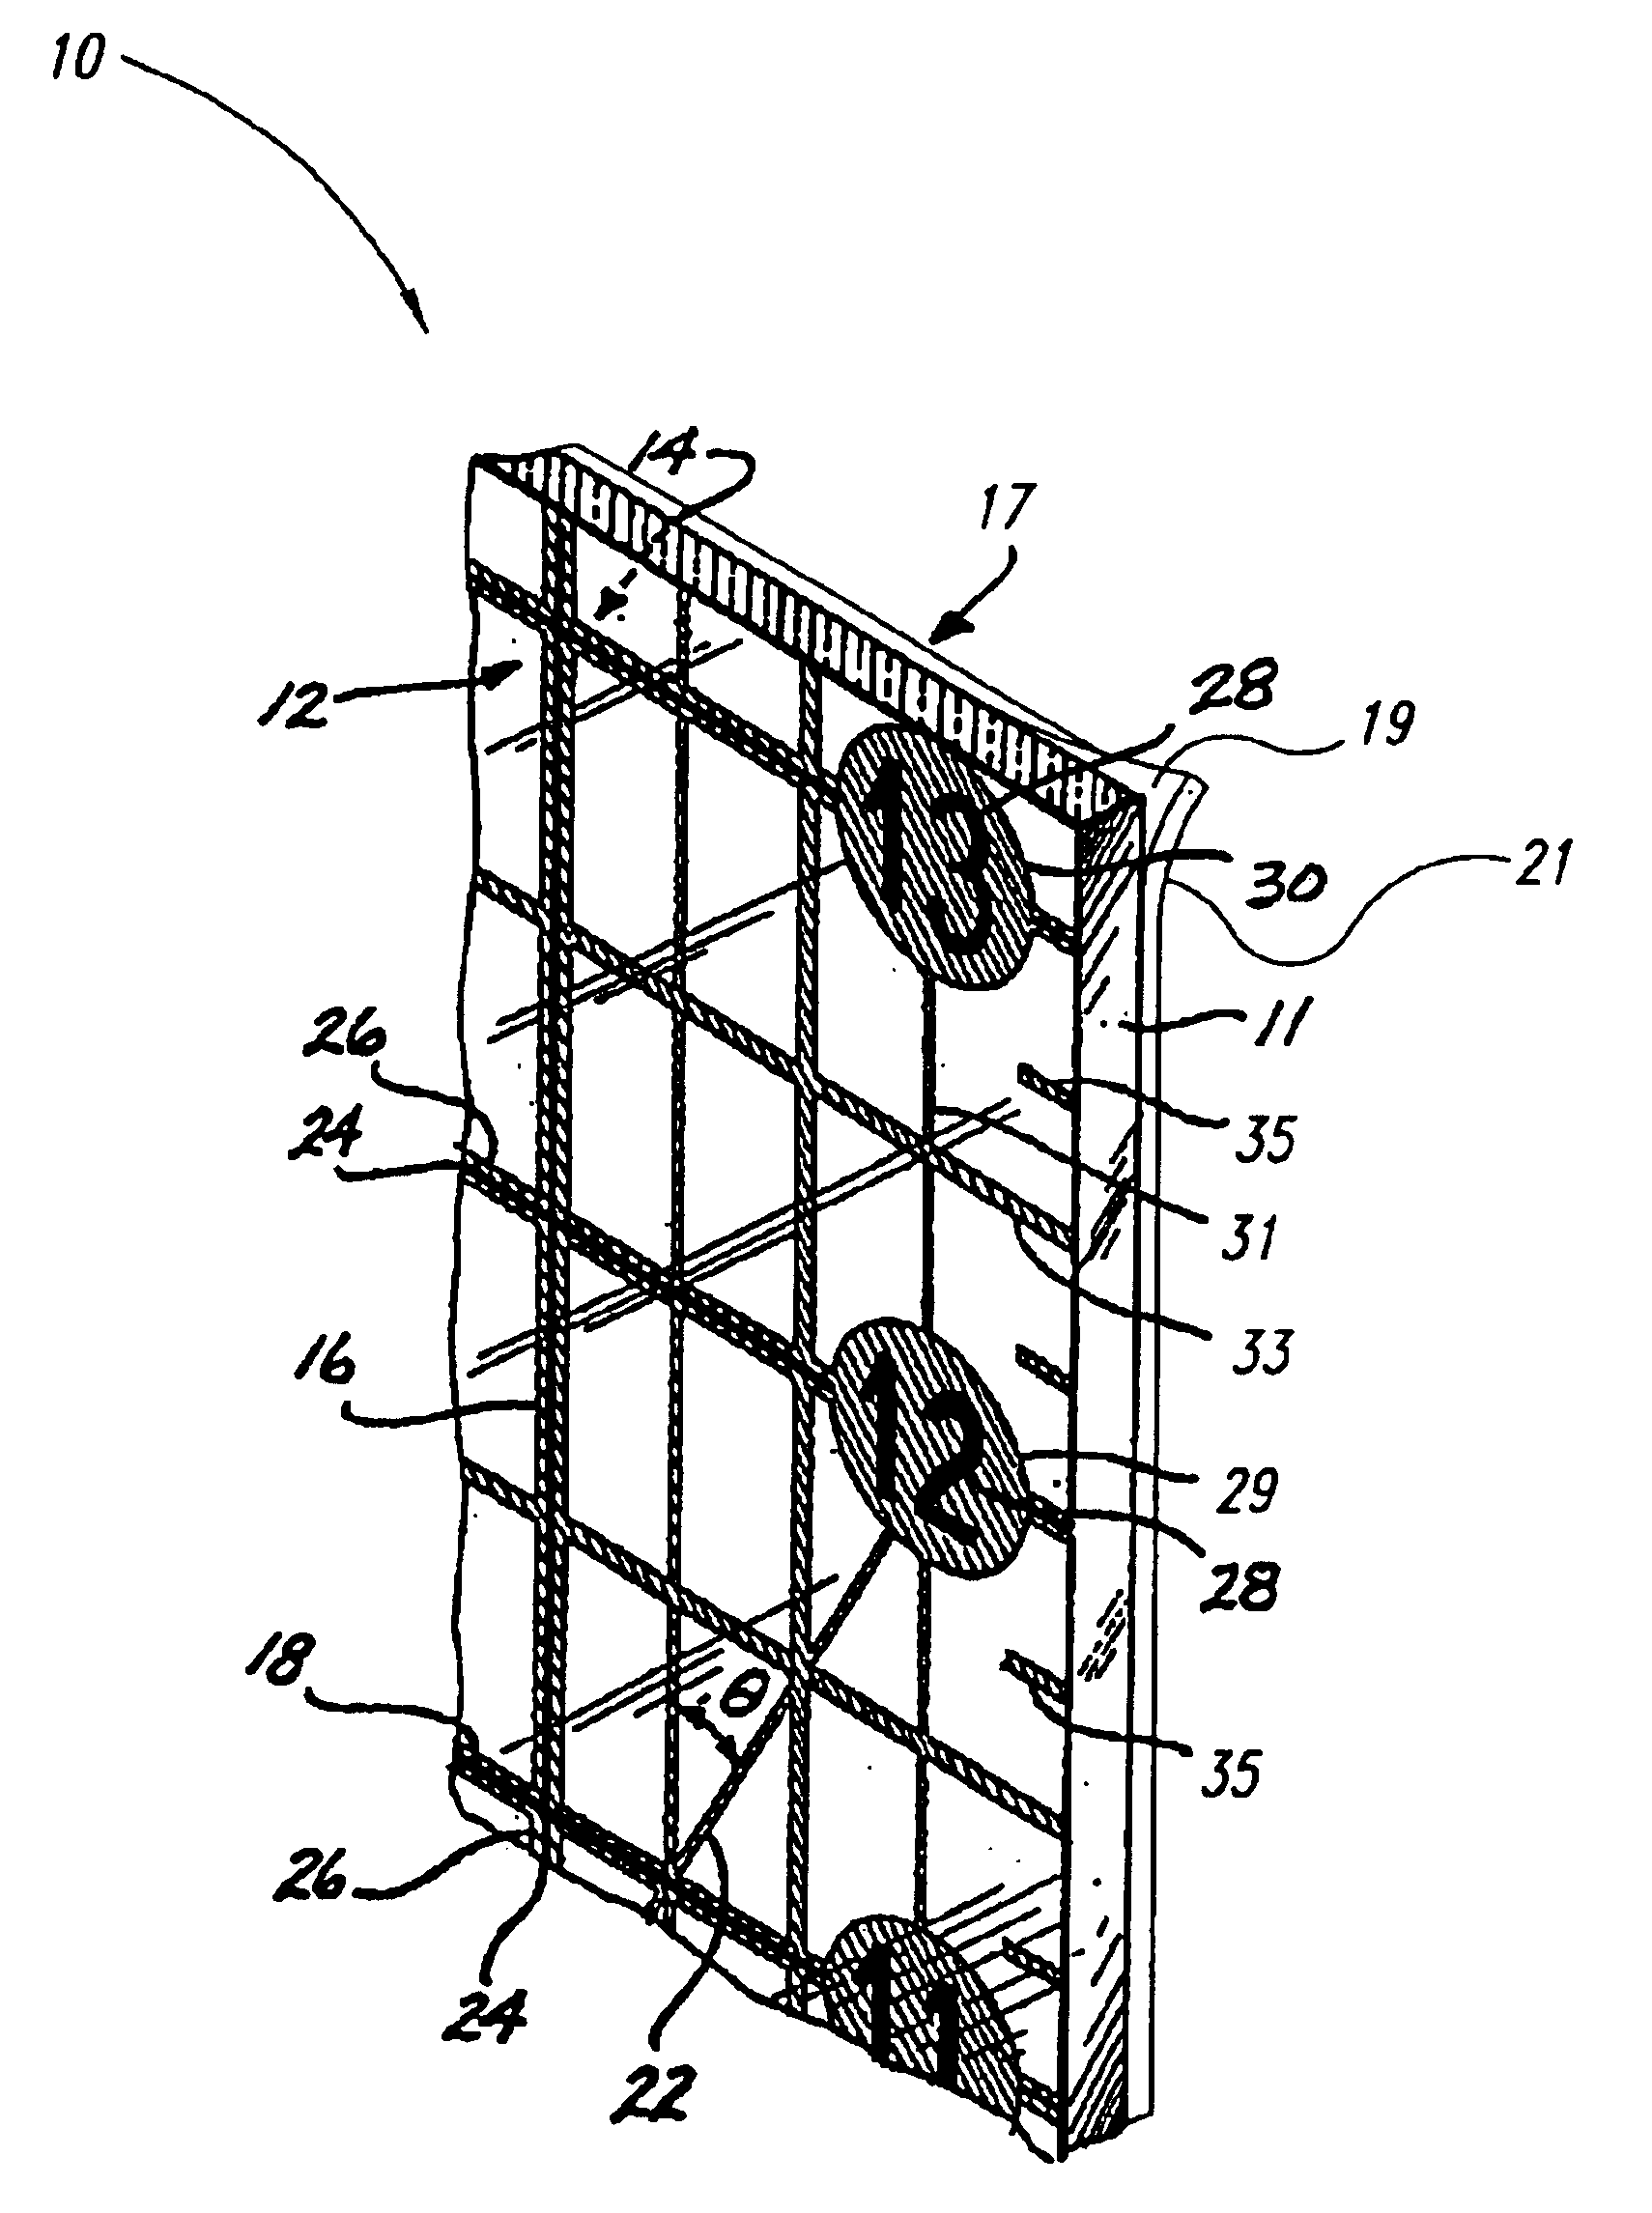 Measuring tool and method of making